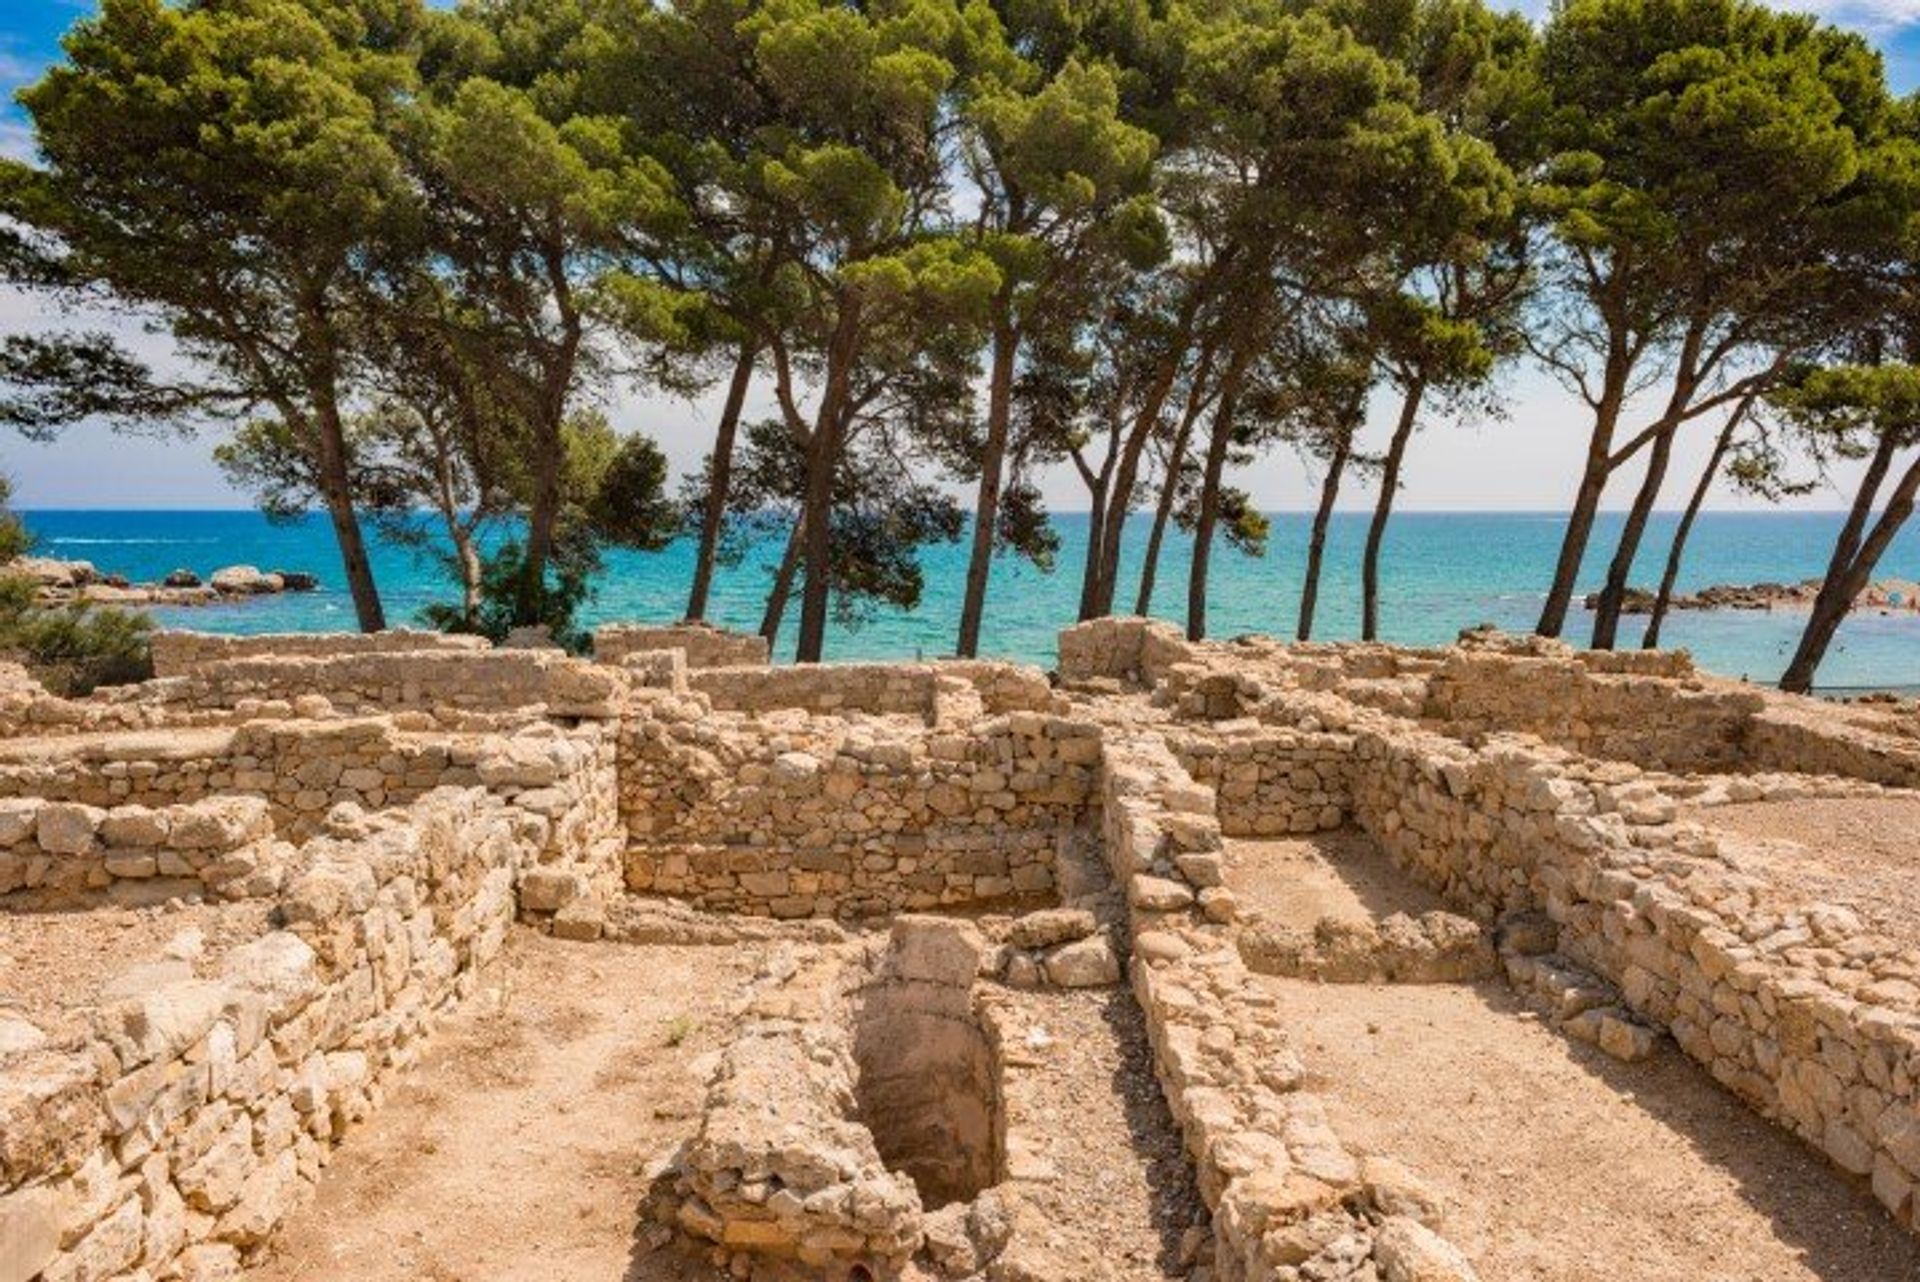 Just under a 30-minute drive away is Castelló d'Empúries town with its ancient Greco-Roman remains